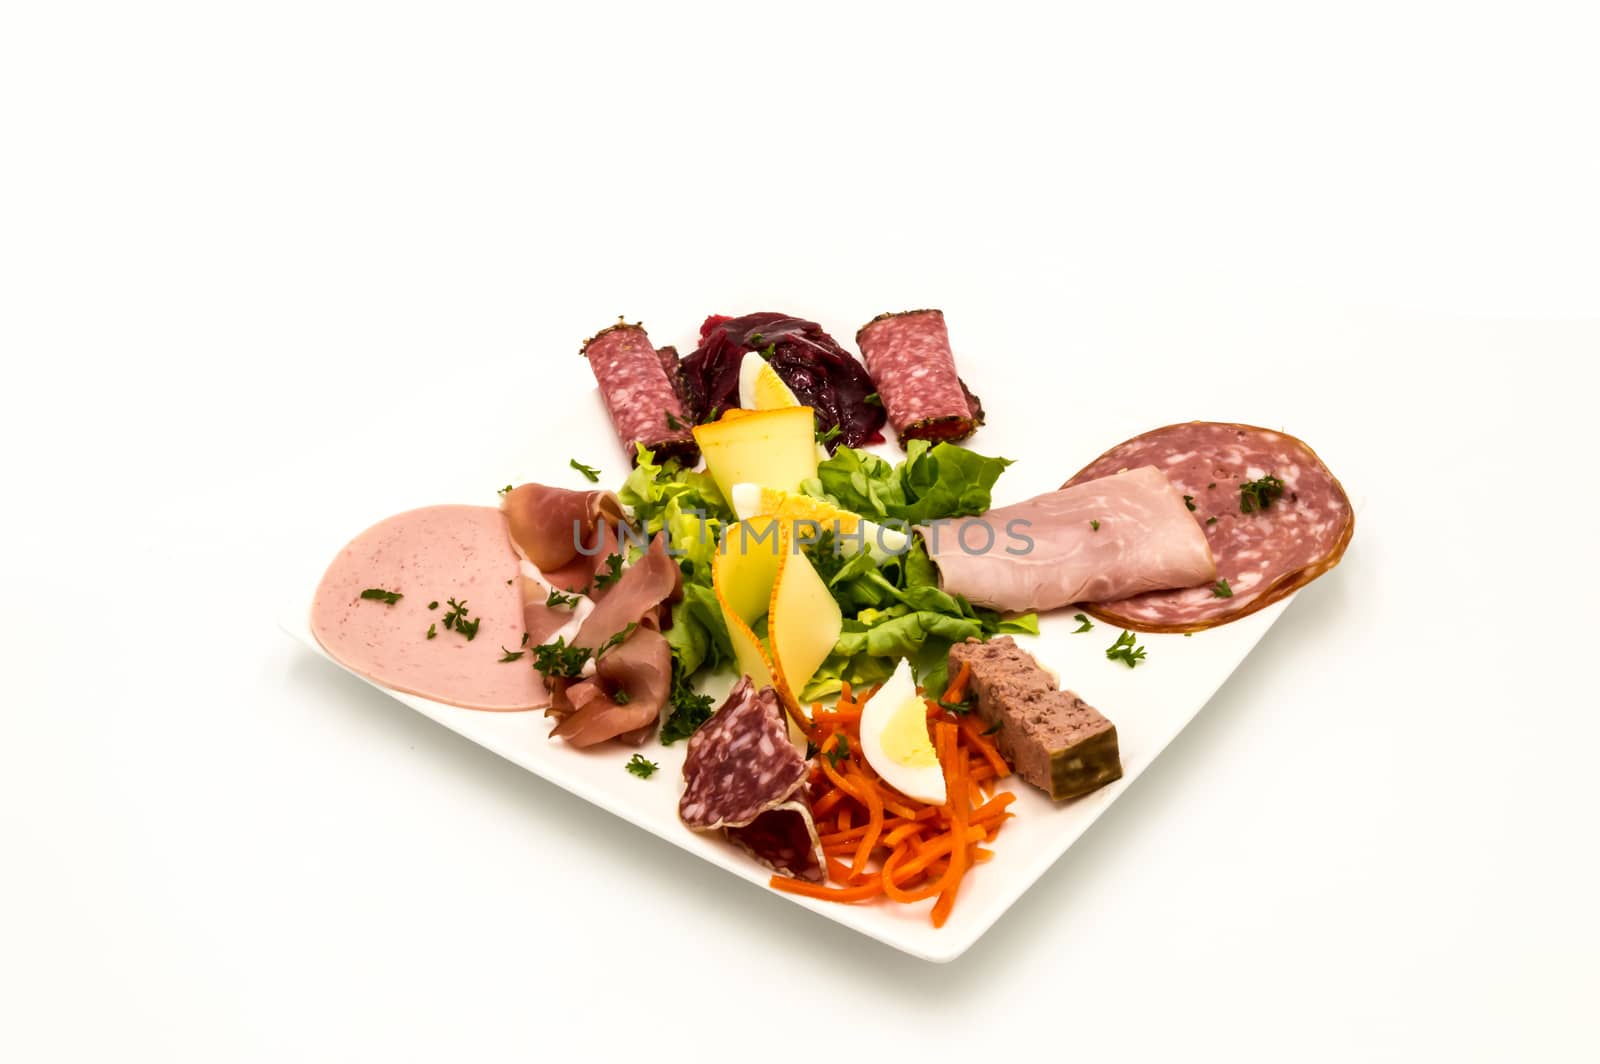 Plate of cold cuts and cheese with raw vegetables  by Philou1000